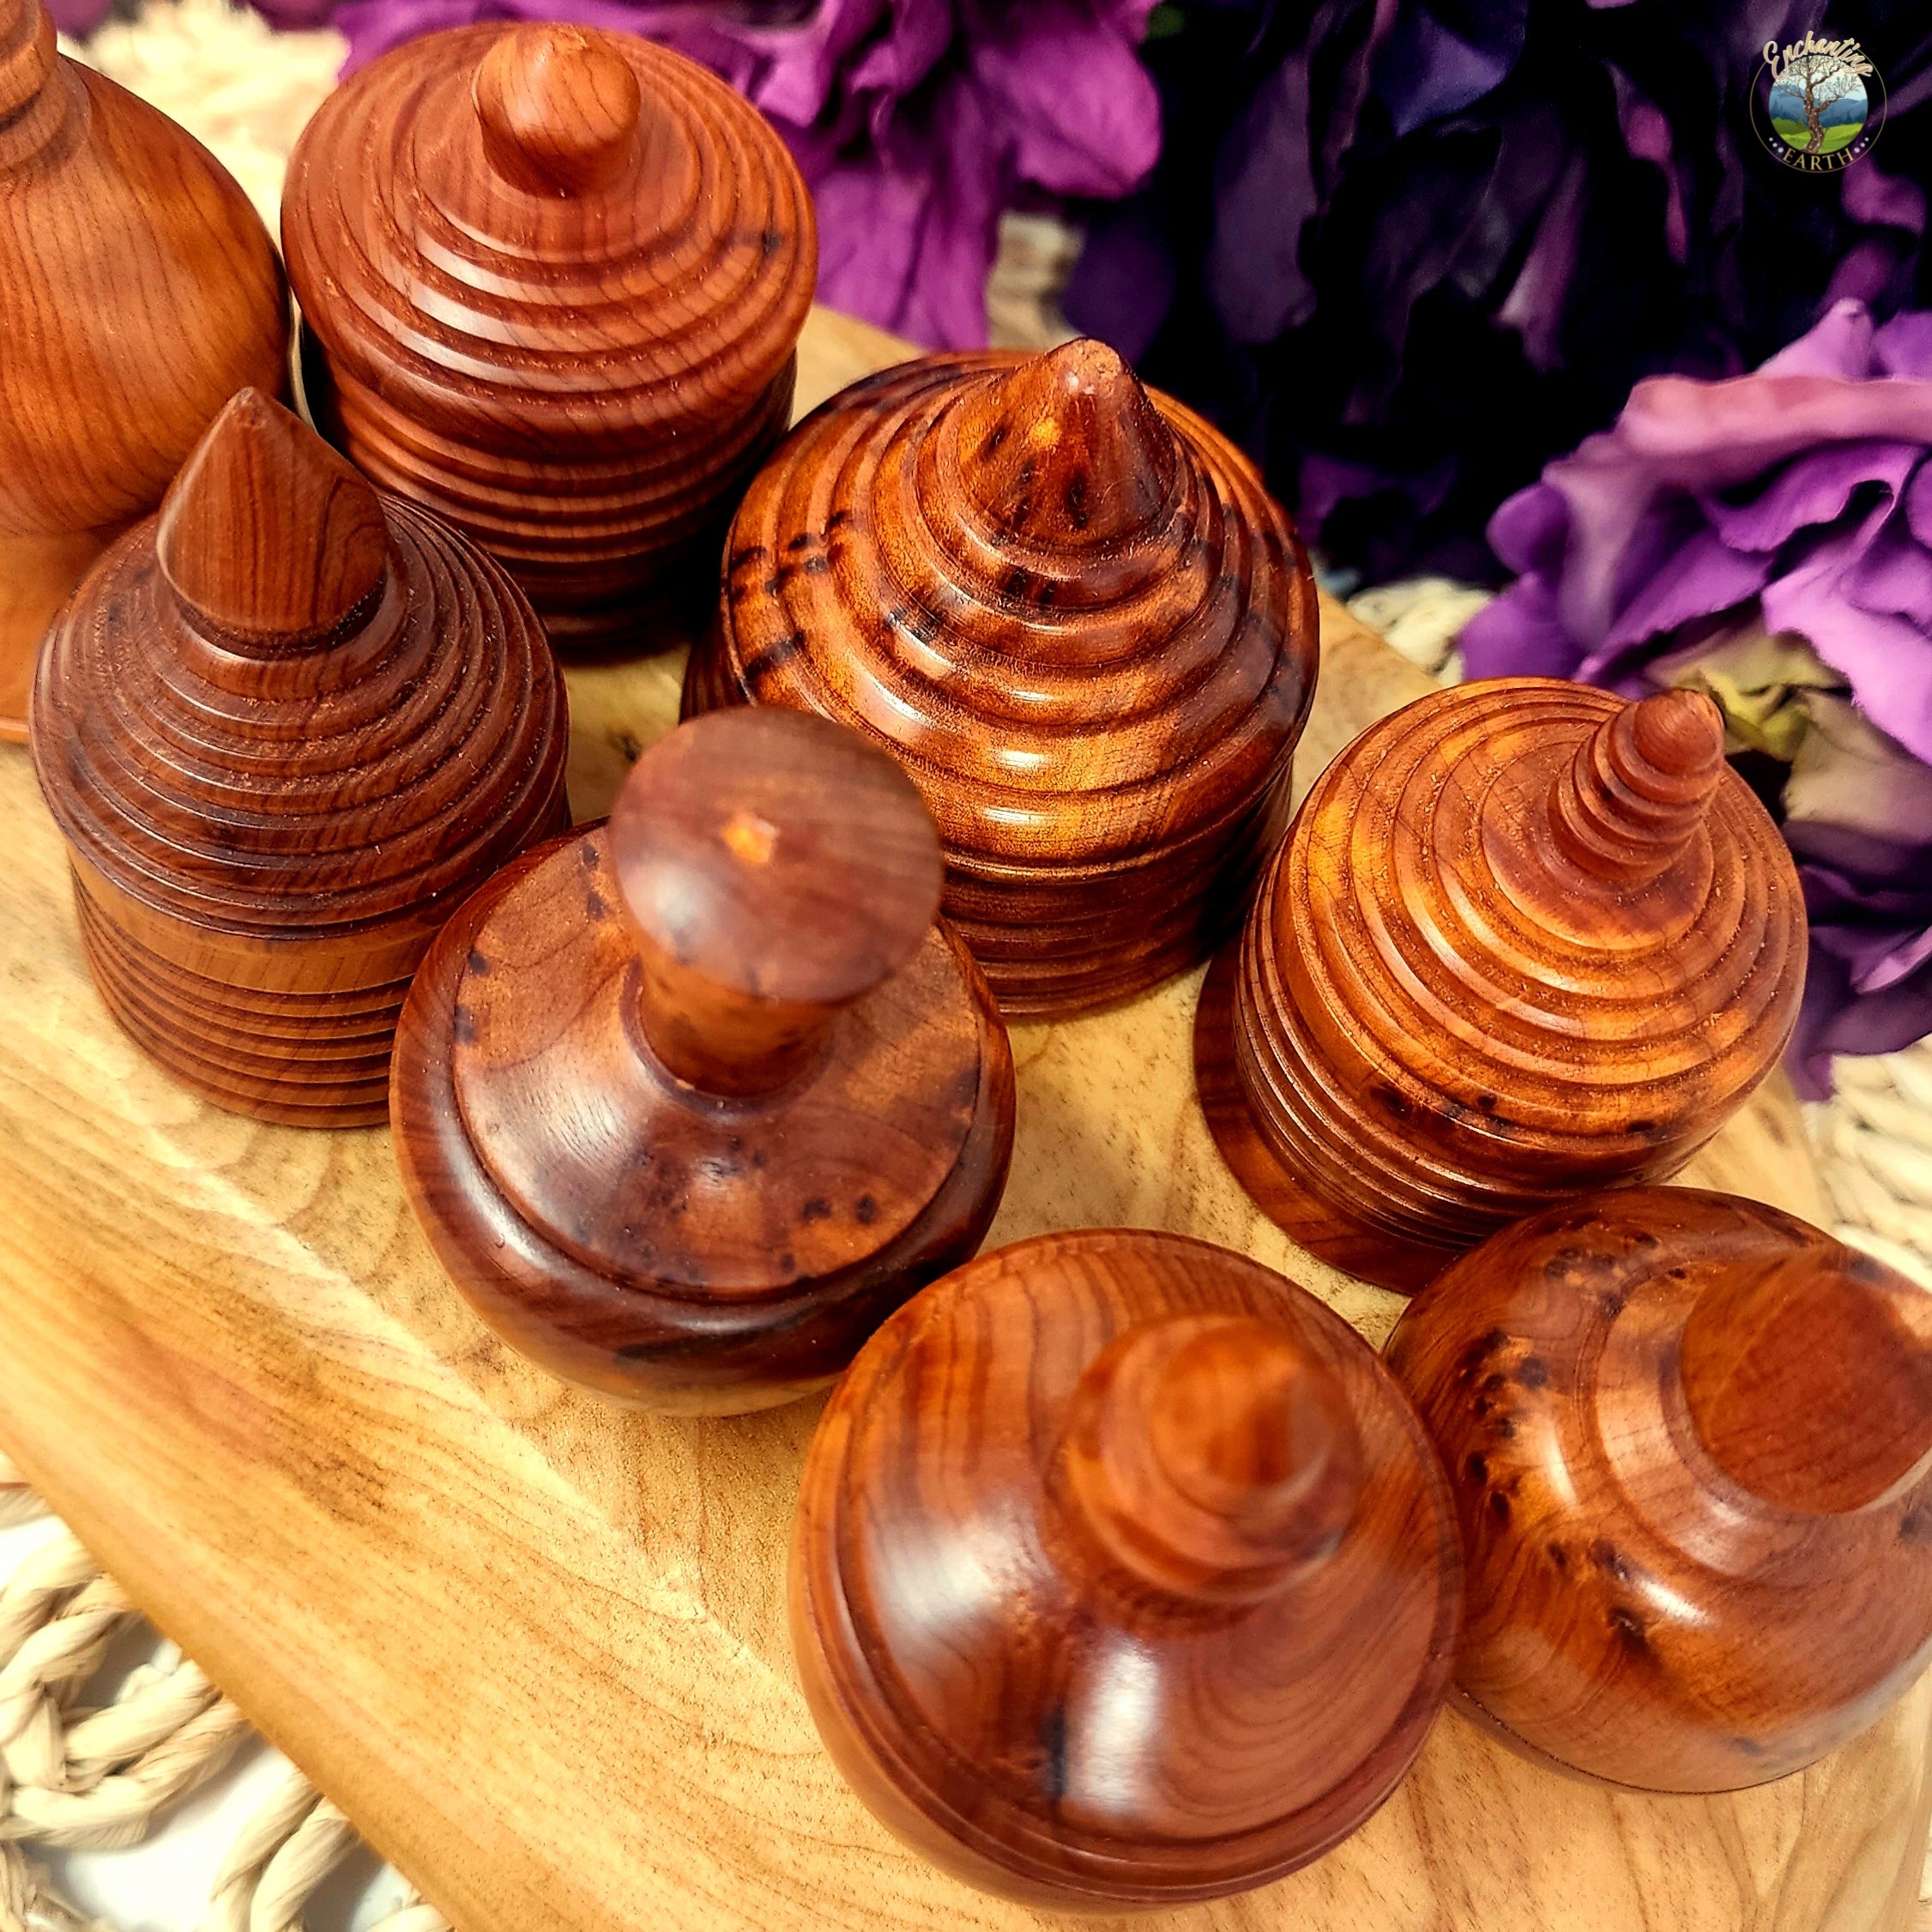 Thuya Wood Mini Box for Storing Crystals and Elevating your Mood